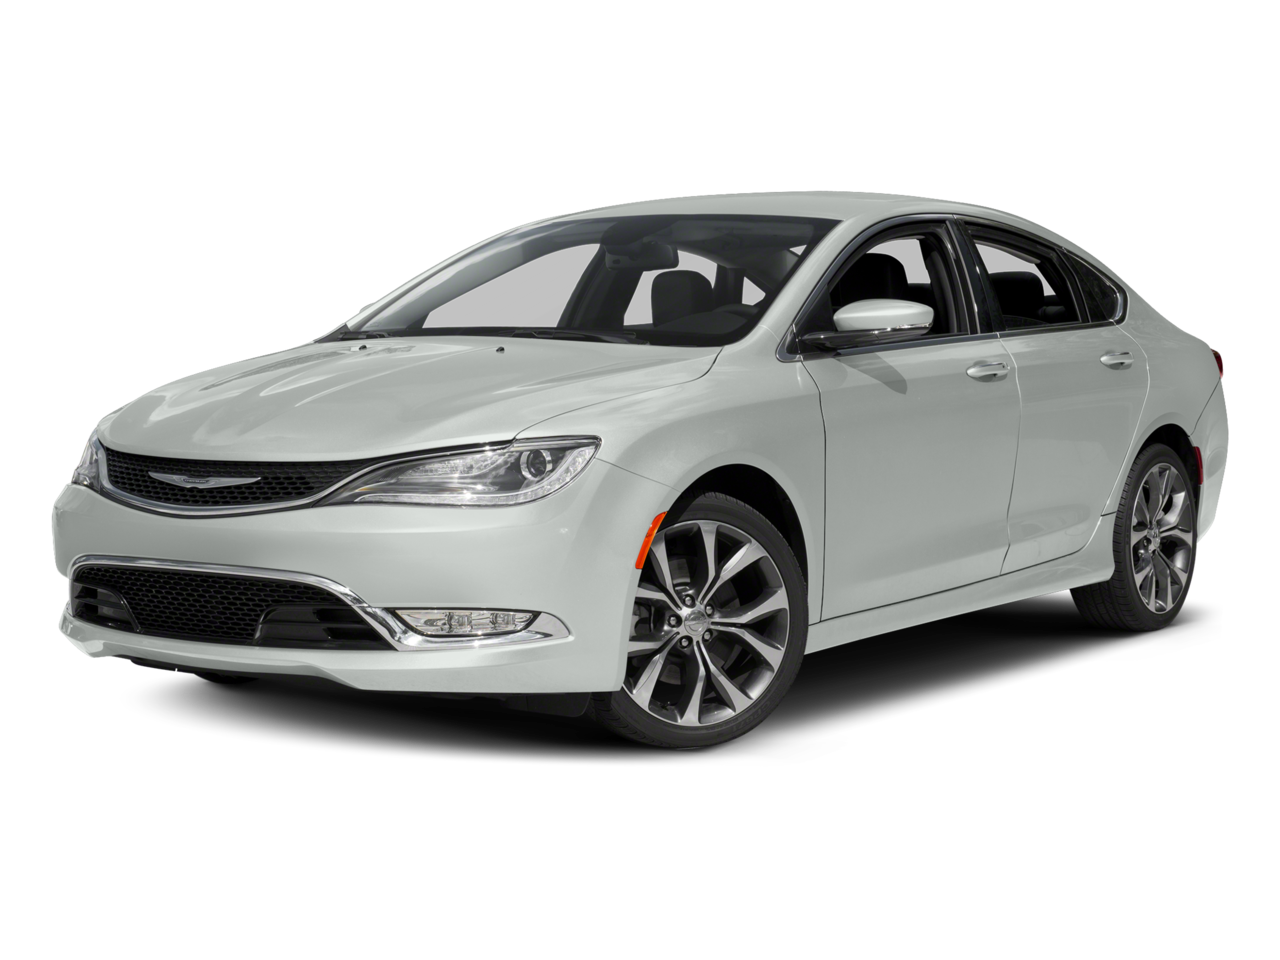 2017 Chrysler 200 Repair: Service and Maintenance Cost